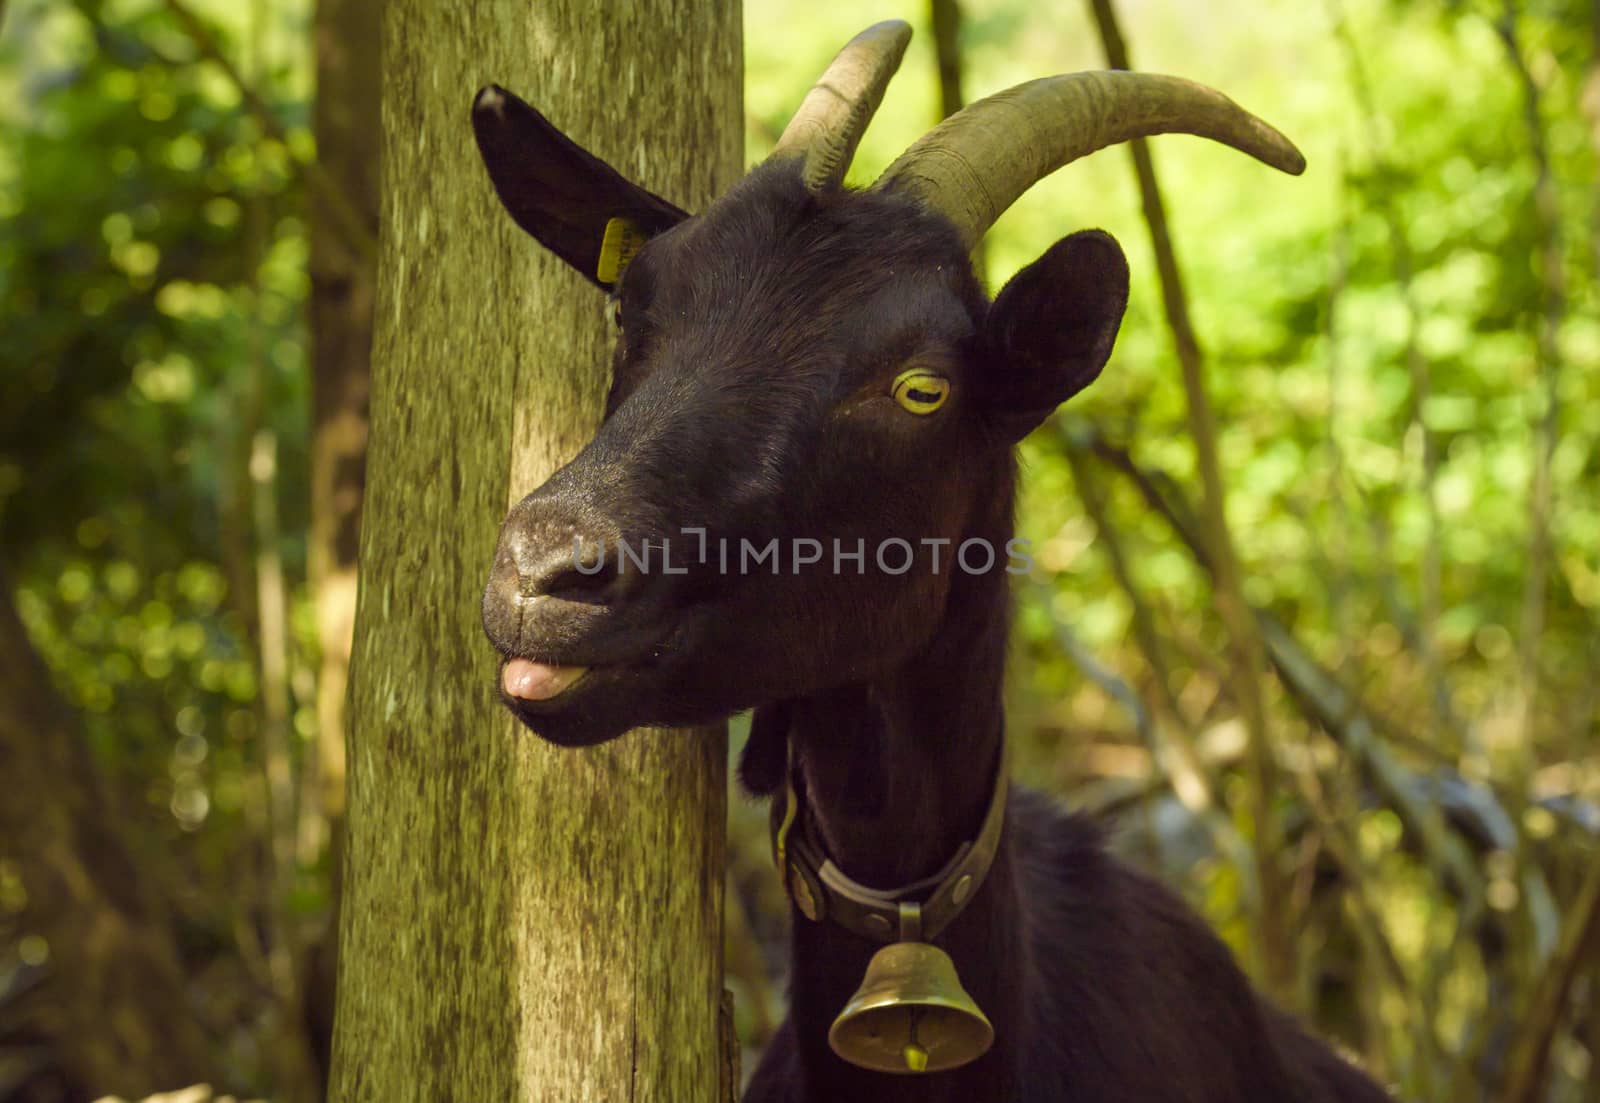 Funny animal image captured in the village Quentin, Switzerland , with a domestic black goat with the tongue out and a bell at its neck